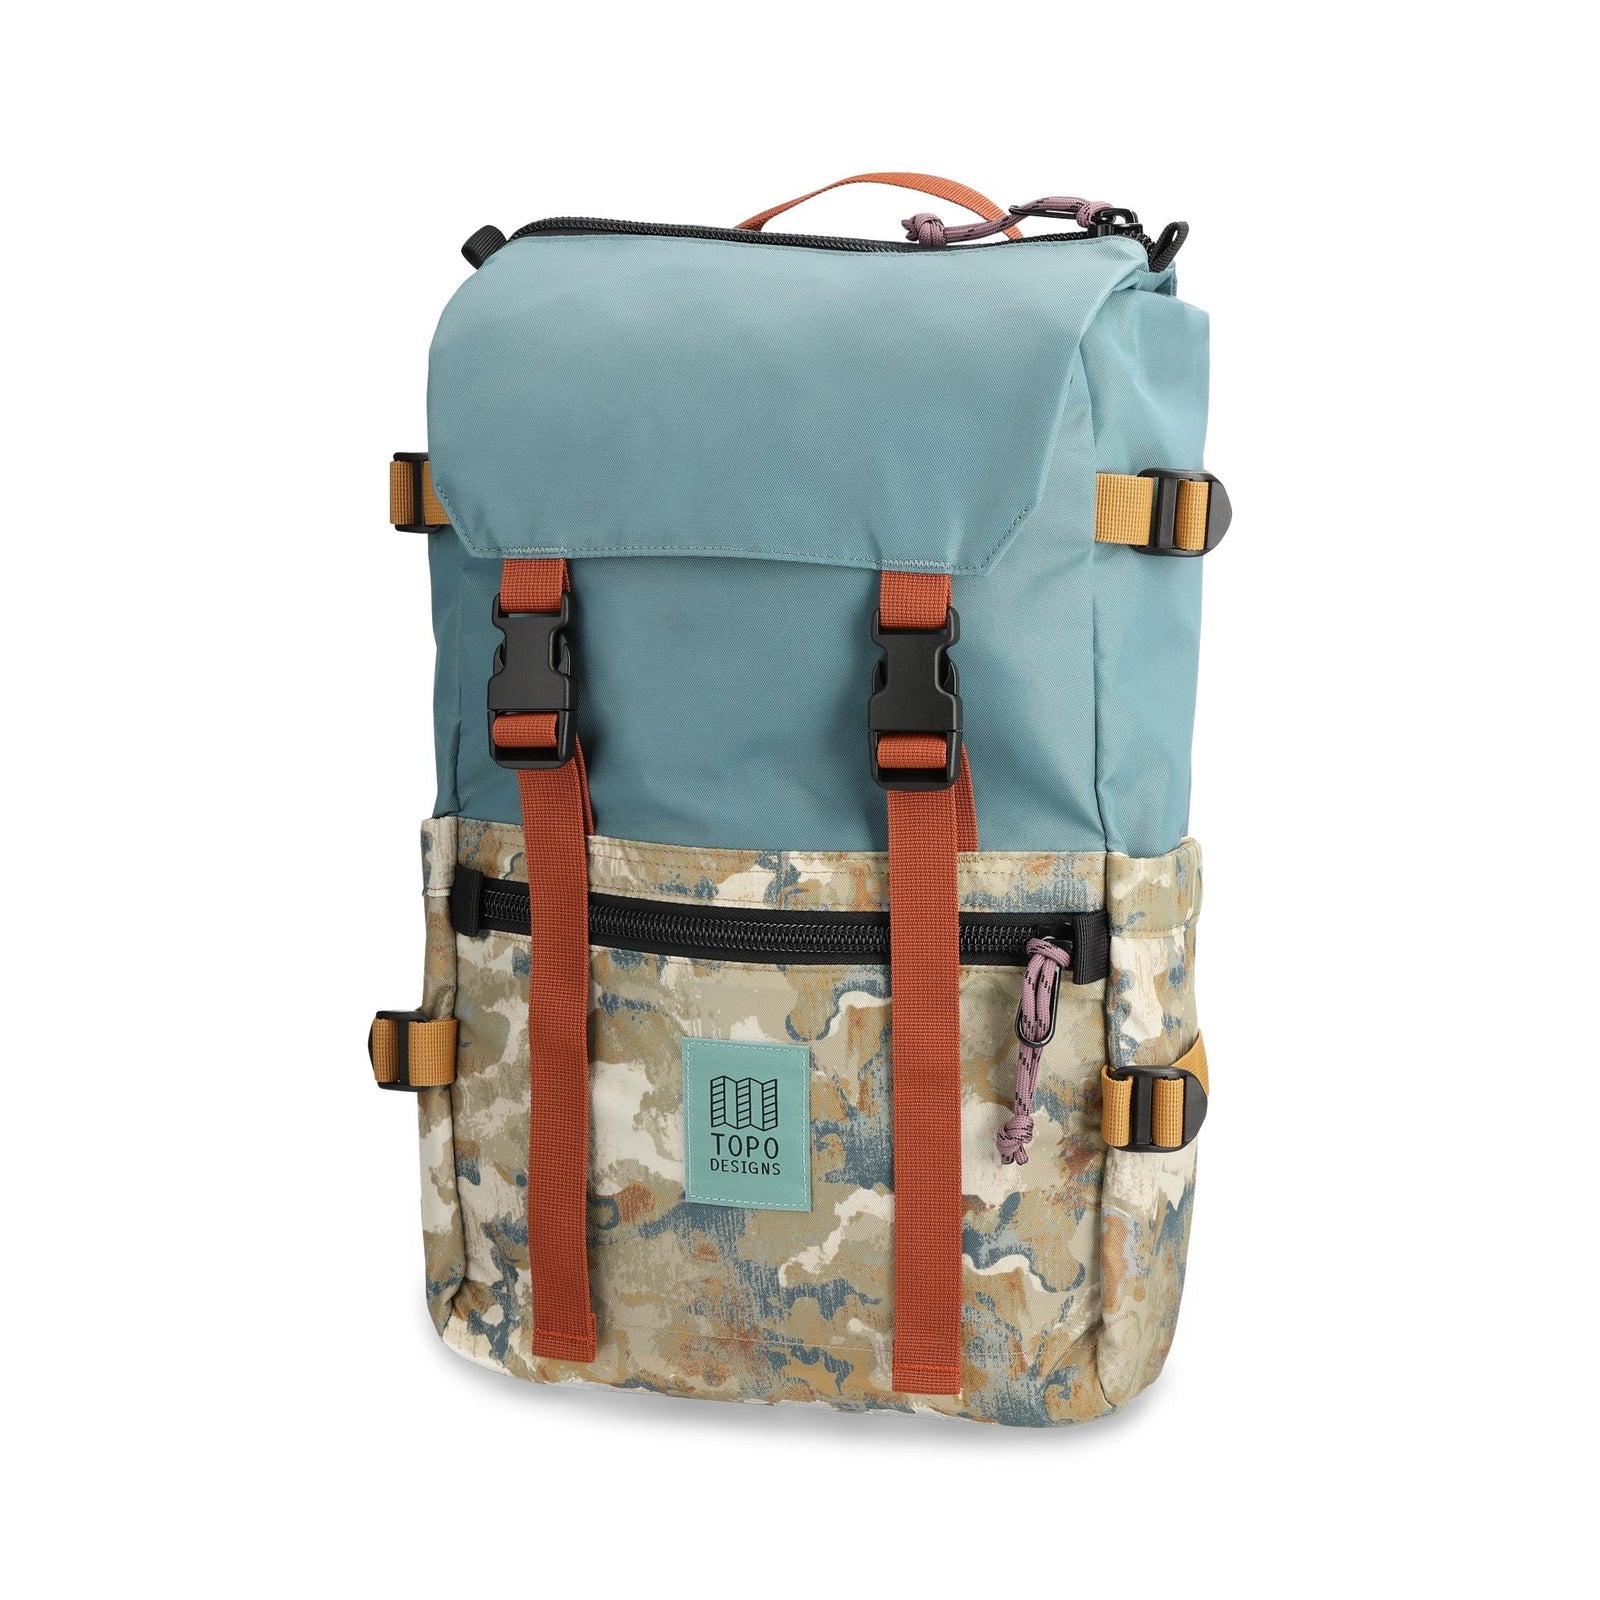 Front View of Topo Designs Rover Pack Classic in "Sea Pine / Blur Camo"